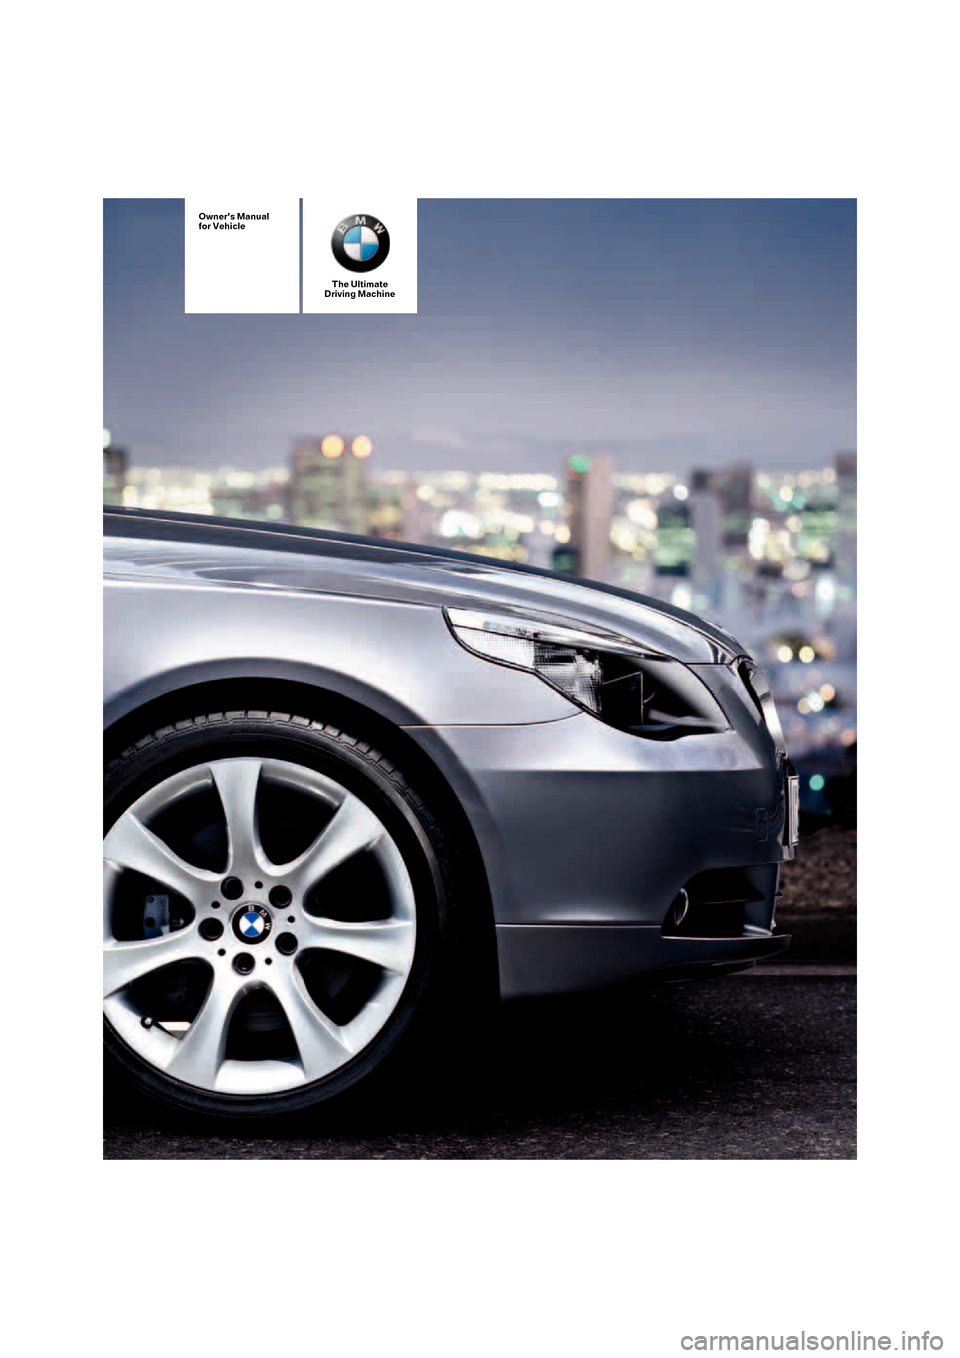 BMW 530XI TOURING 2006 E61 Owners Manual The Ultimate
Driving Machine
Owners Manual
for Vehicle 